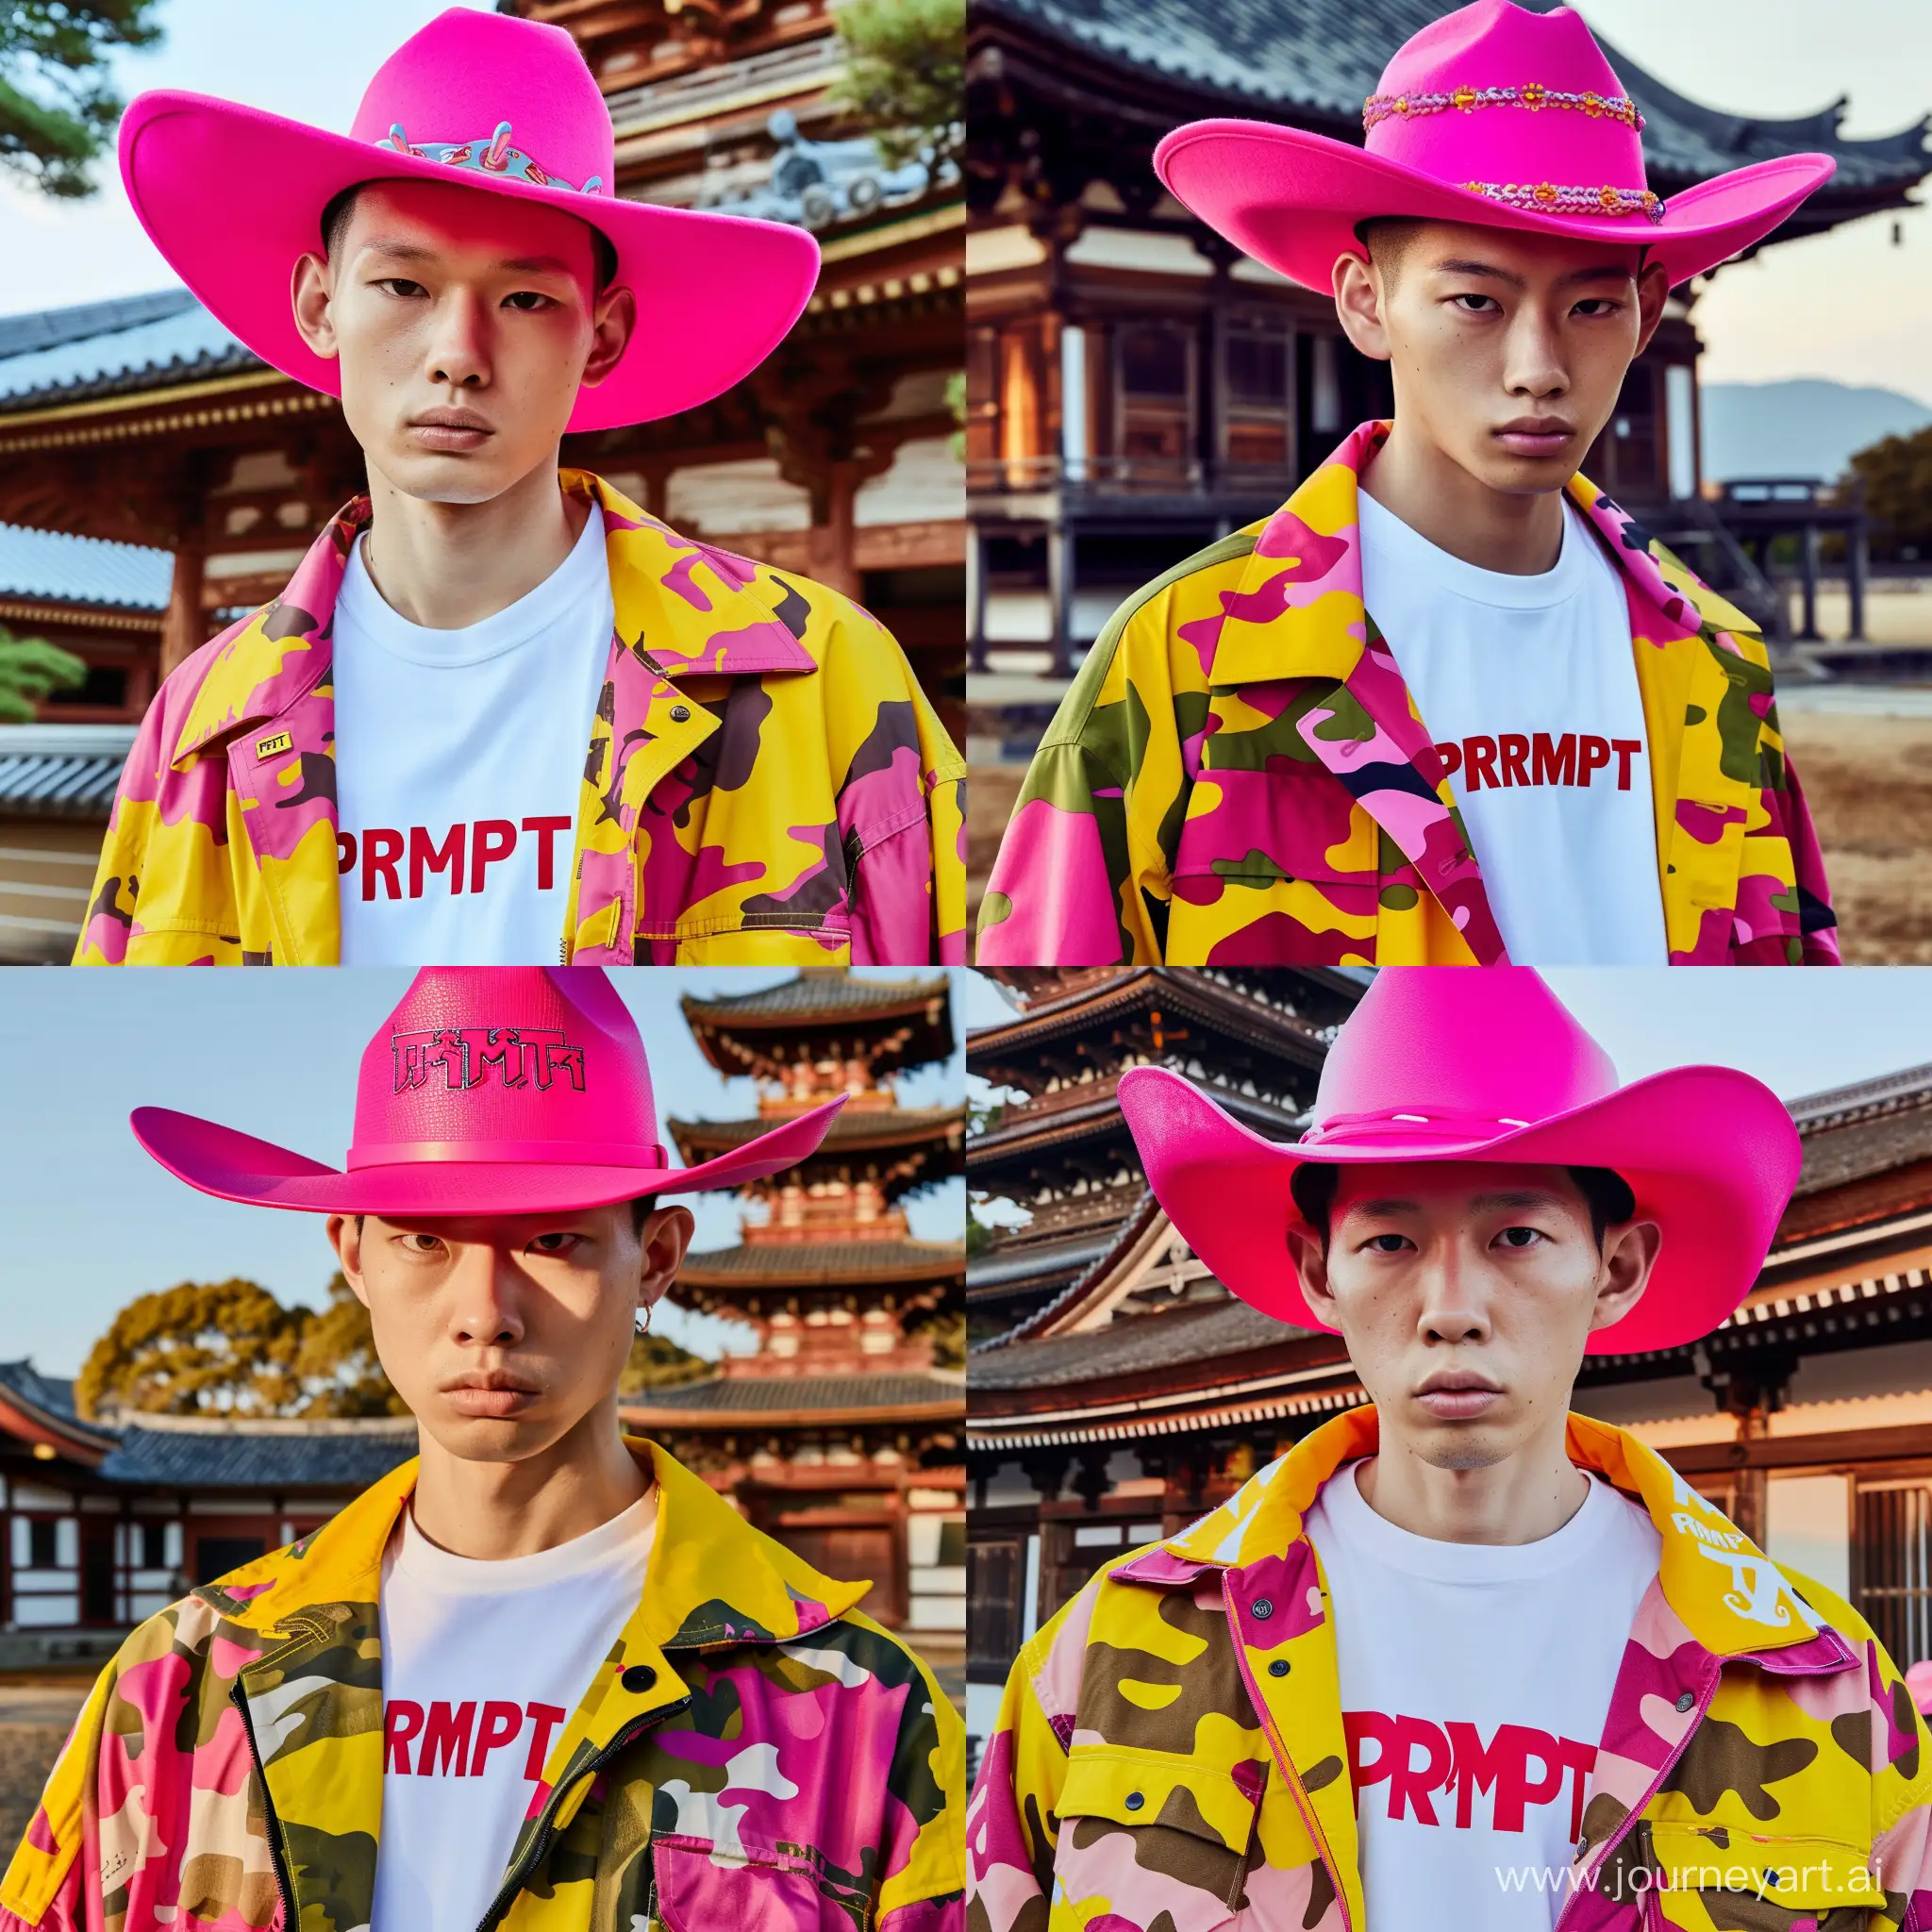 editorial fashion shot, asian ethnicity, male, short black hair, intense gaze, pale complexion, neon pink cowboy hat, vibrant yellow and pink camo jacket, white tee with red “PRMPT” branding, traditional Japanese temple backdrop, high contrast daylight, vivid and playful mood --sref https://cdn.discordapp.com/attachments/1187305629551972372/1205841229187915816/1-65c71e9087014_image_3___Balanced_2.jpg?ex=65d9d628&is=65c76128&hm=6265861b5ee41d0c0aae76bf0097e4517d62efa664e0a3167a028d967cb03950& --sw 1000 